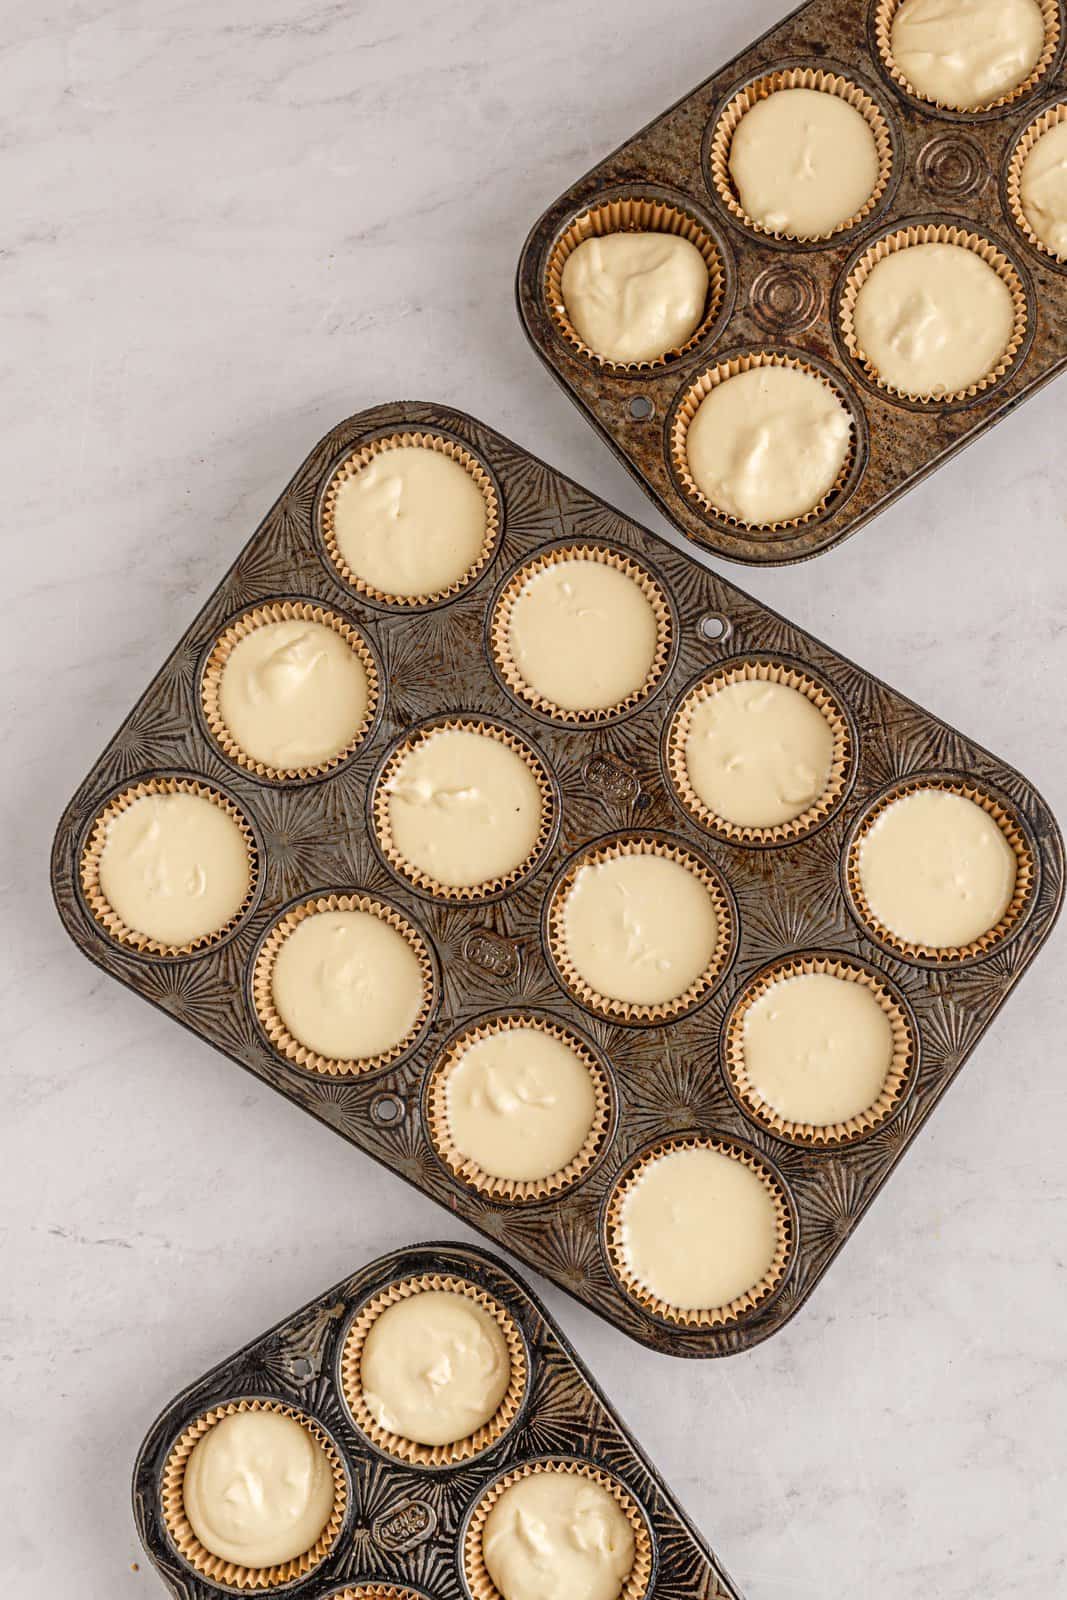 Cheesecake batter distributed among the wells of the muffin tins.